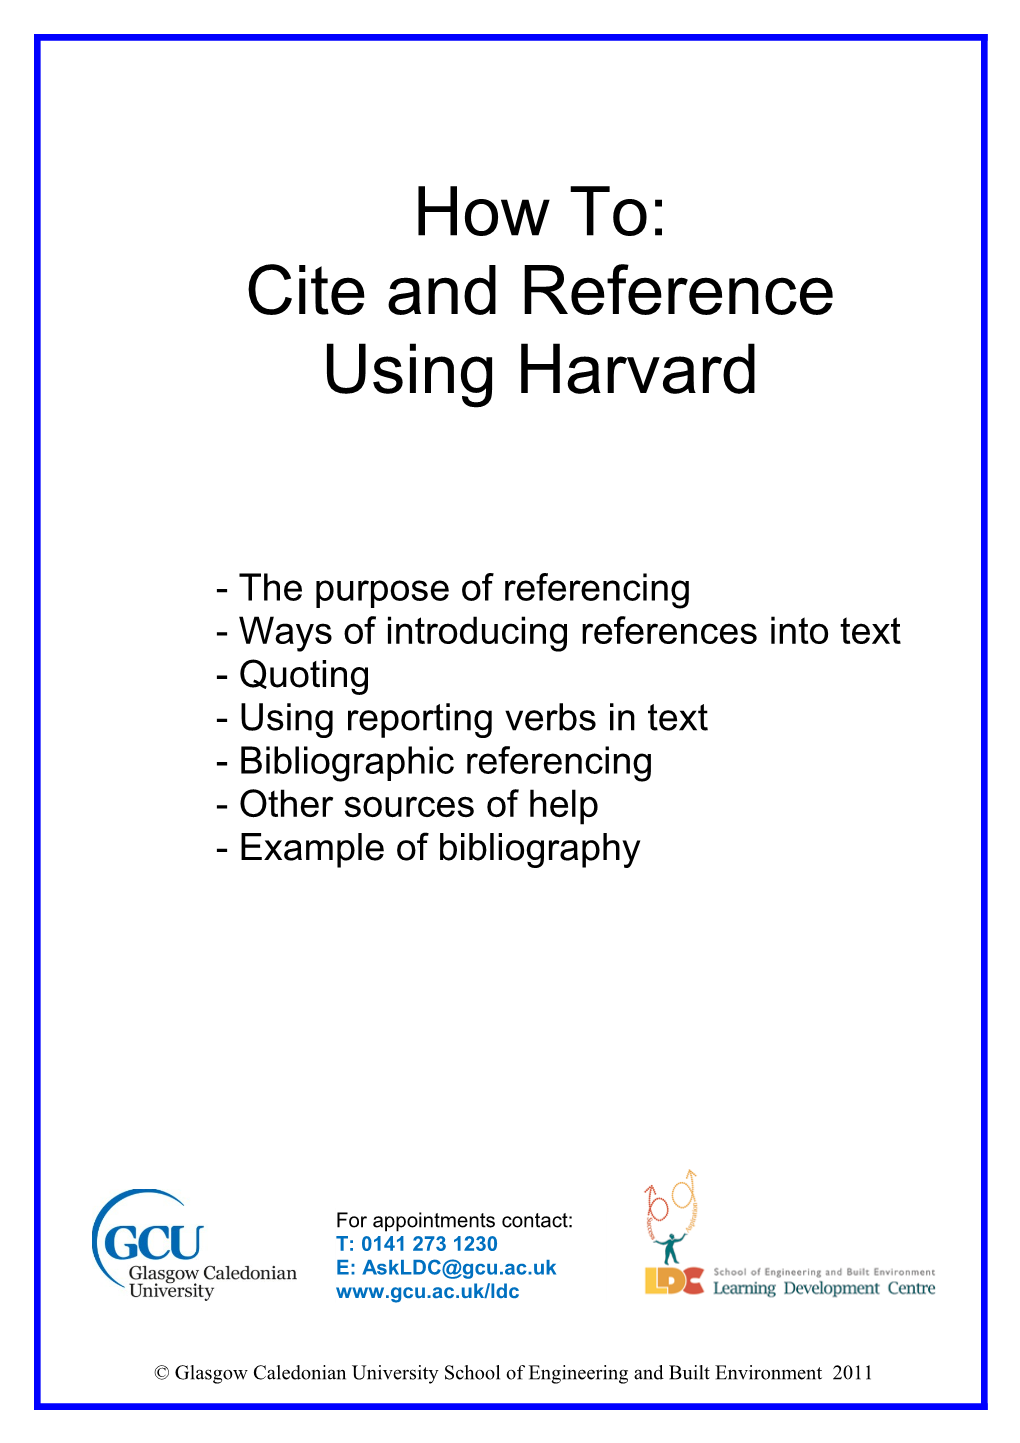 How To: Cite and Reference